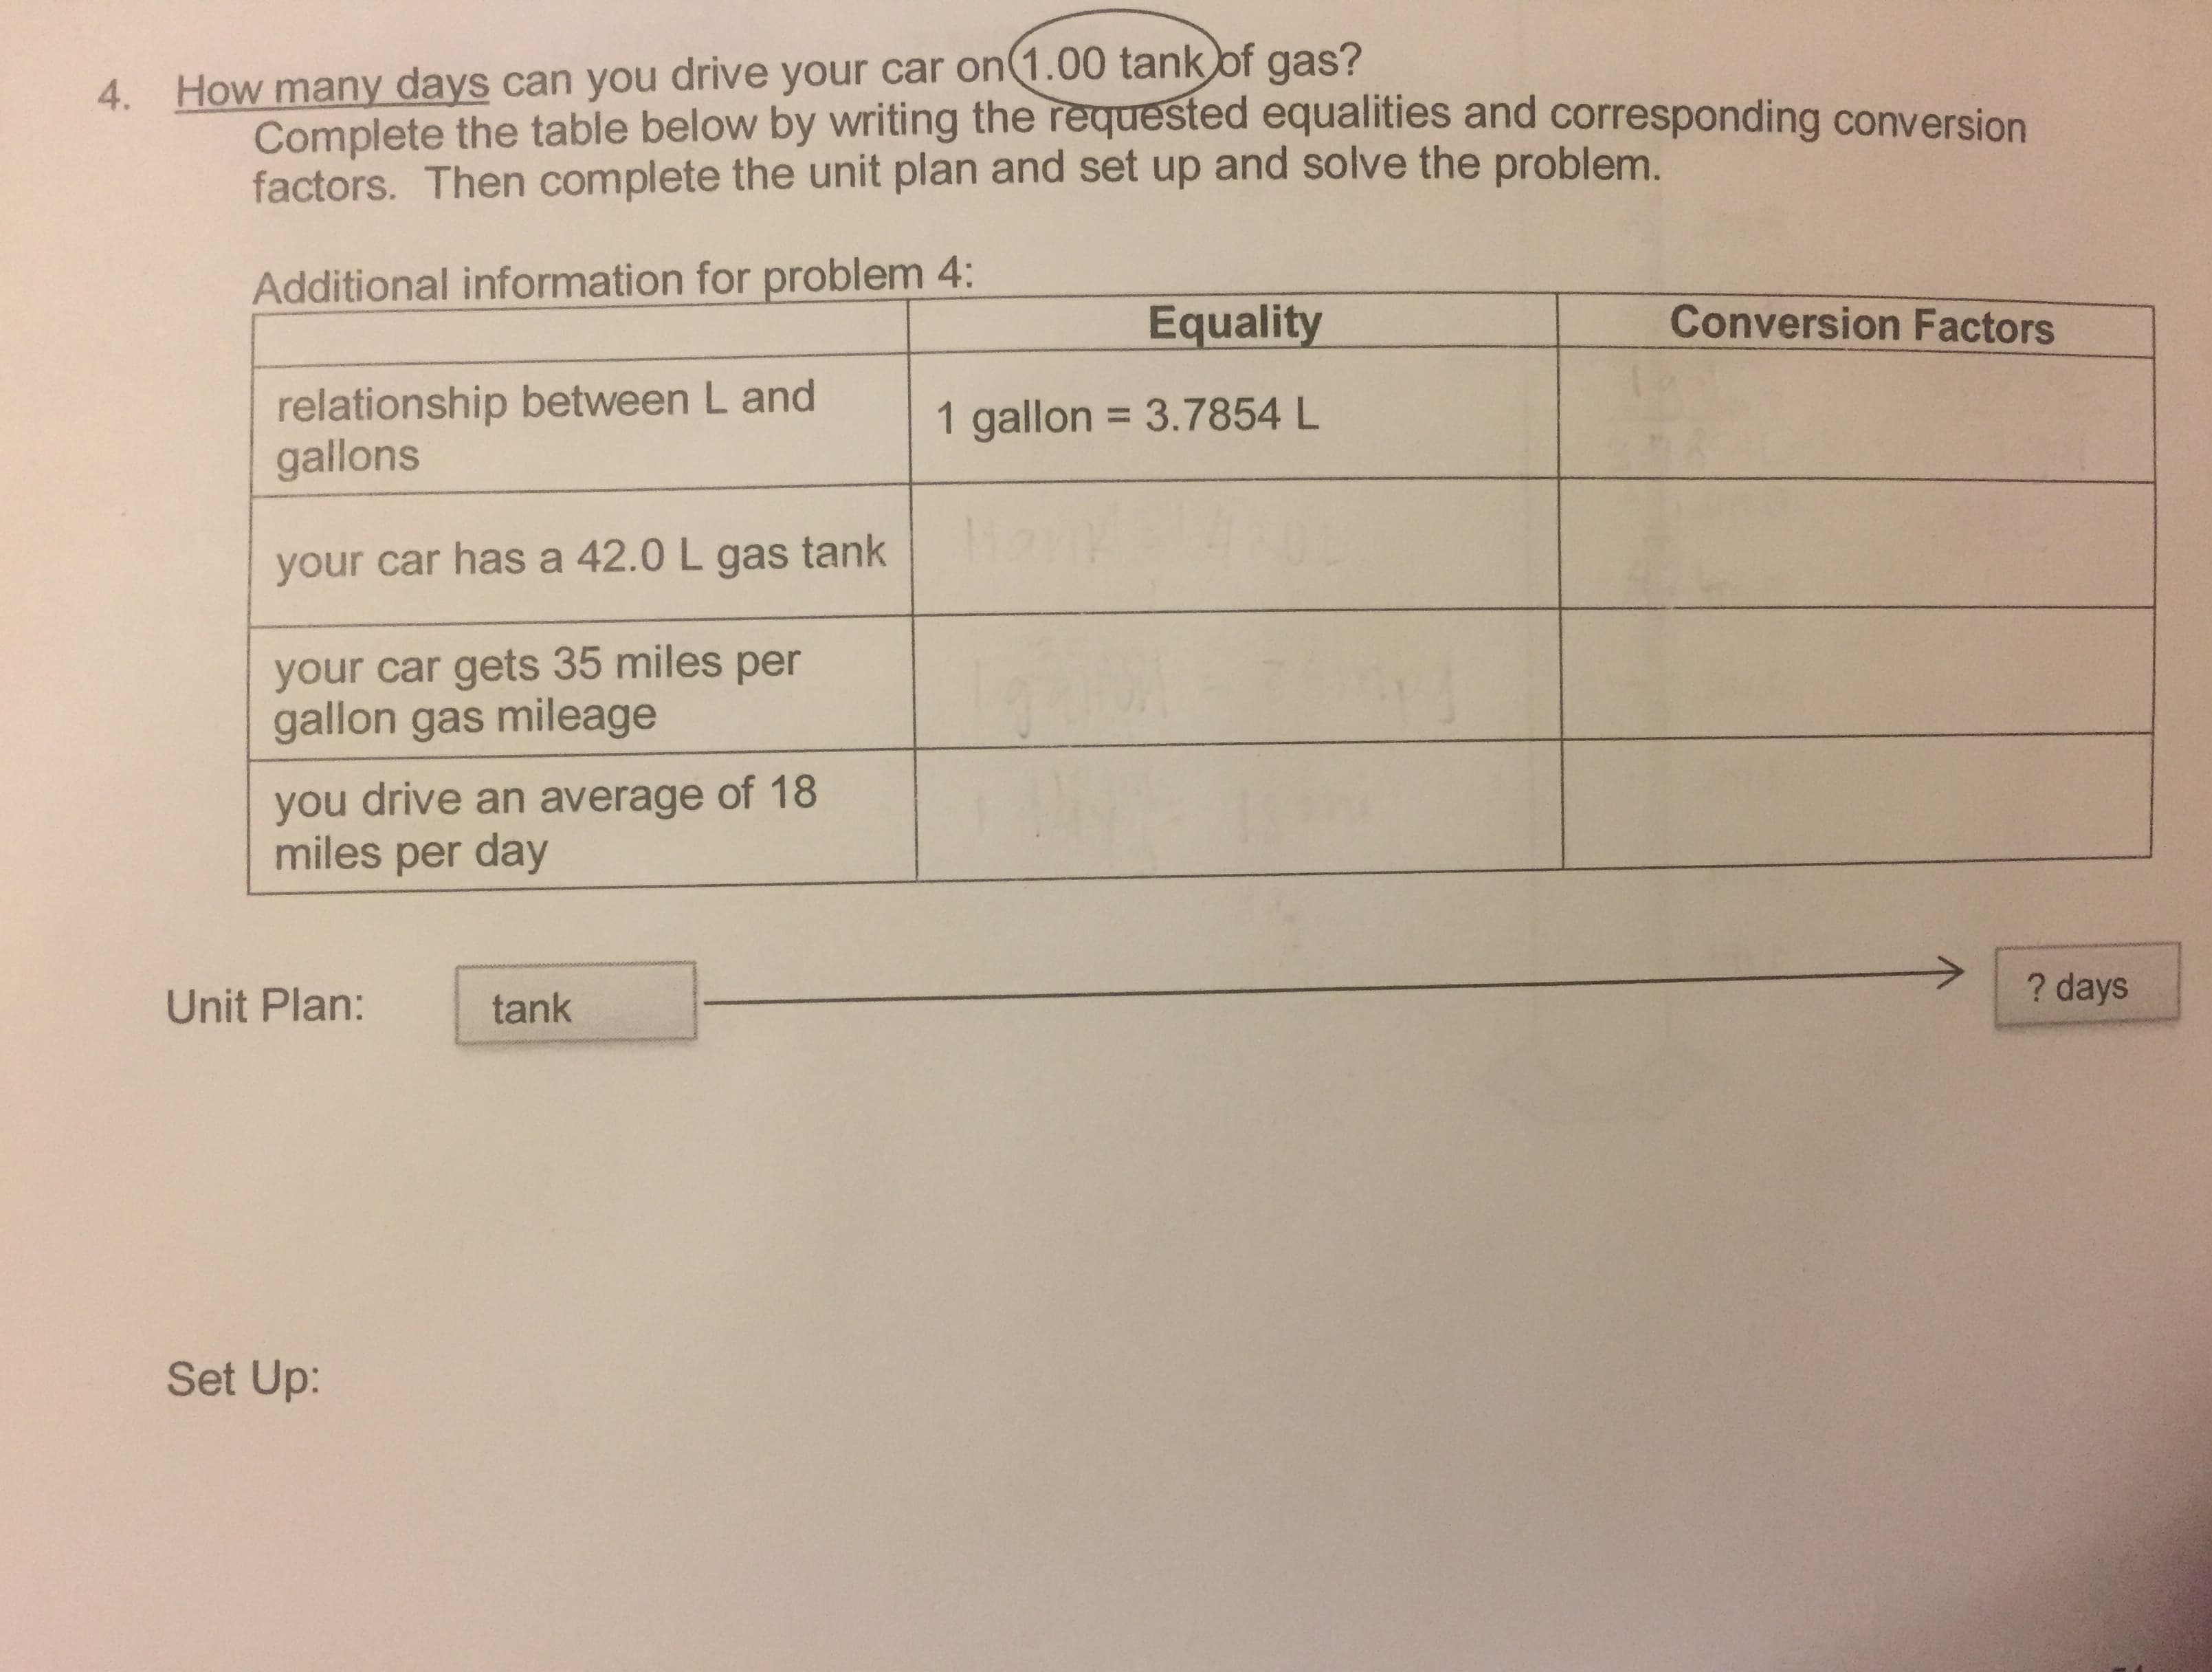 4. How many days can you drive your car on(1.00 tank of gas?
Complete the table below by writing the requested equalities and corresponding conversion
factors. Then complete the unit plan and set up and solve the problem.
Additional information for problem 4:
Conversion Factors
Equality
relationship between L and
gallons
1 gallon = 3.7854 L
your car has a 42.0 L gas tank
your car gets 35 miles per
gallon gas mileage
you drive an average of 18
miles per day
? days
Unit Plan:
tank
Set Up:
